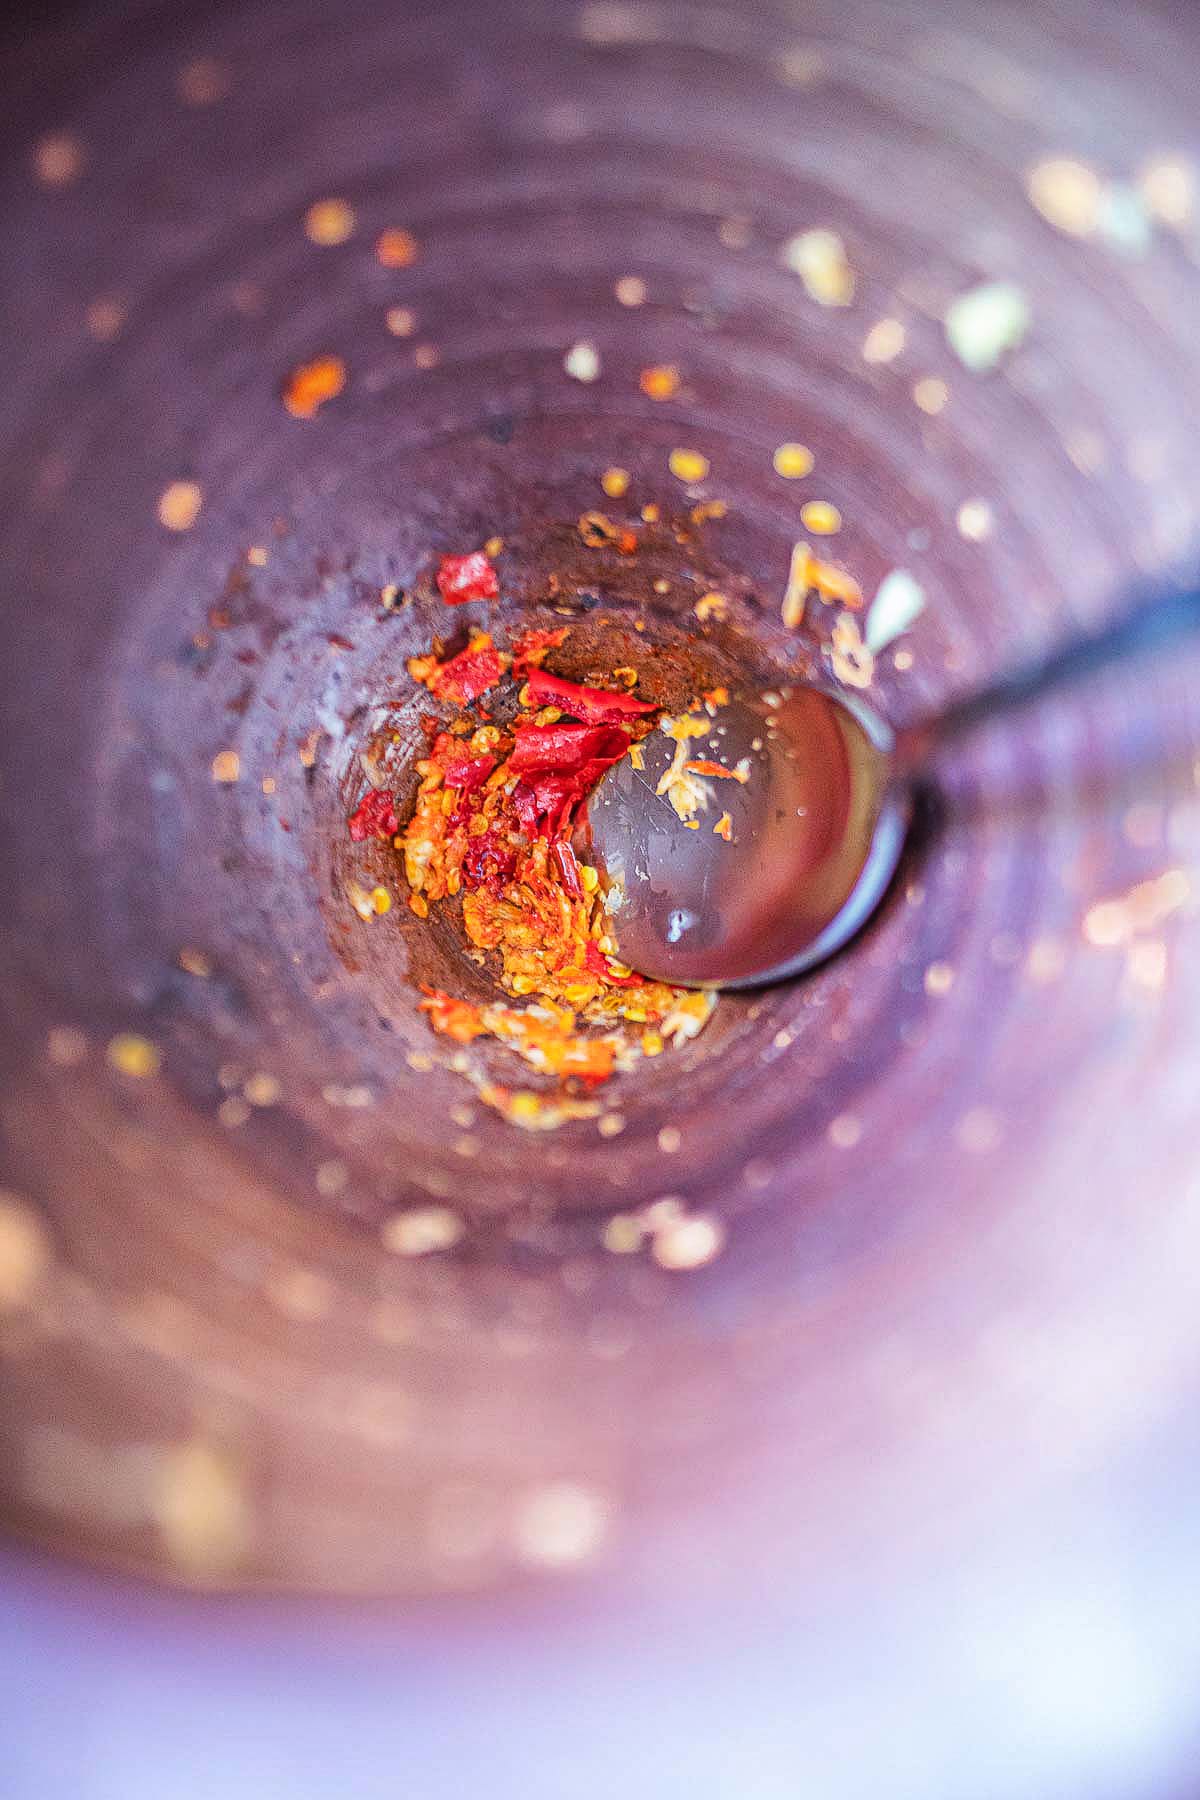 pounded chili and garlic in mortar